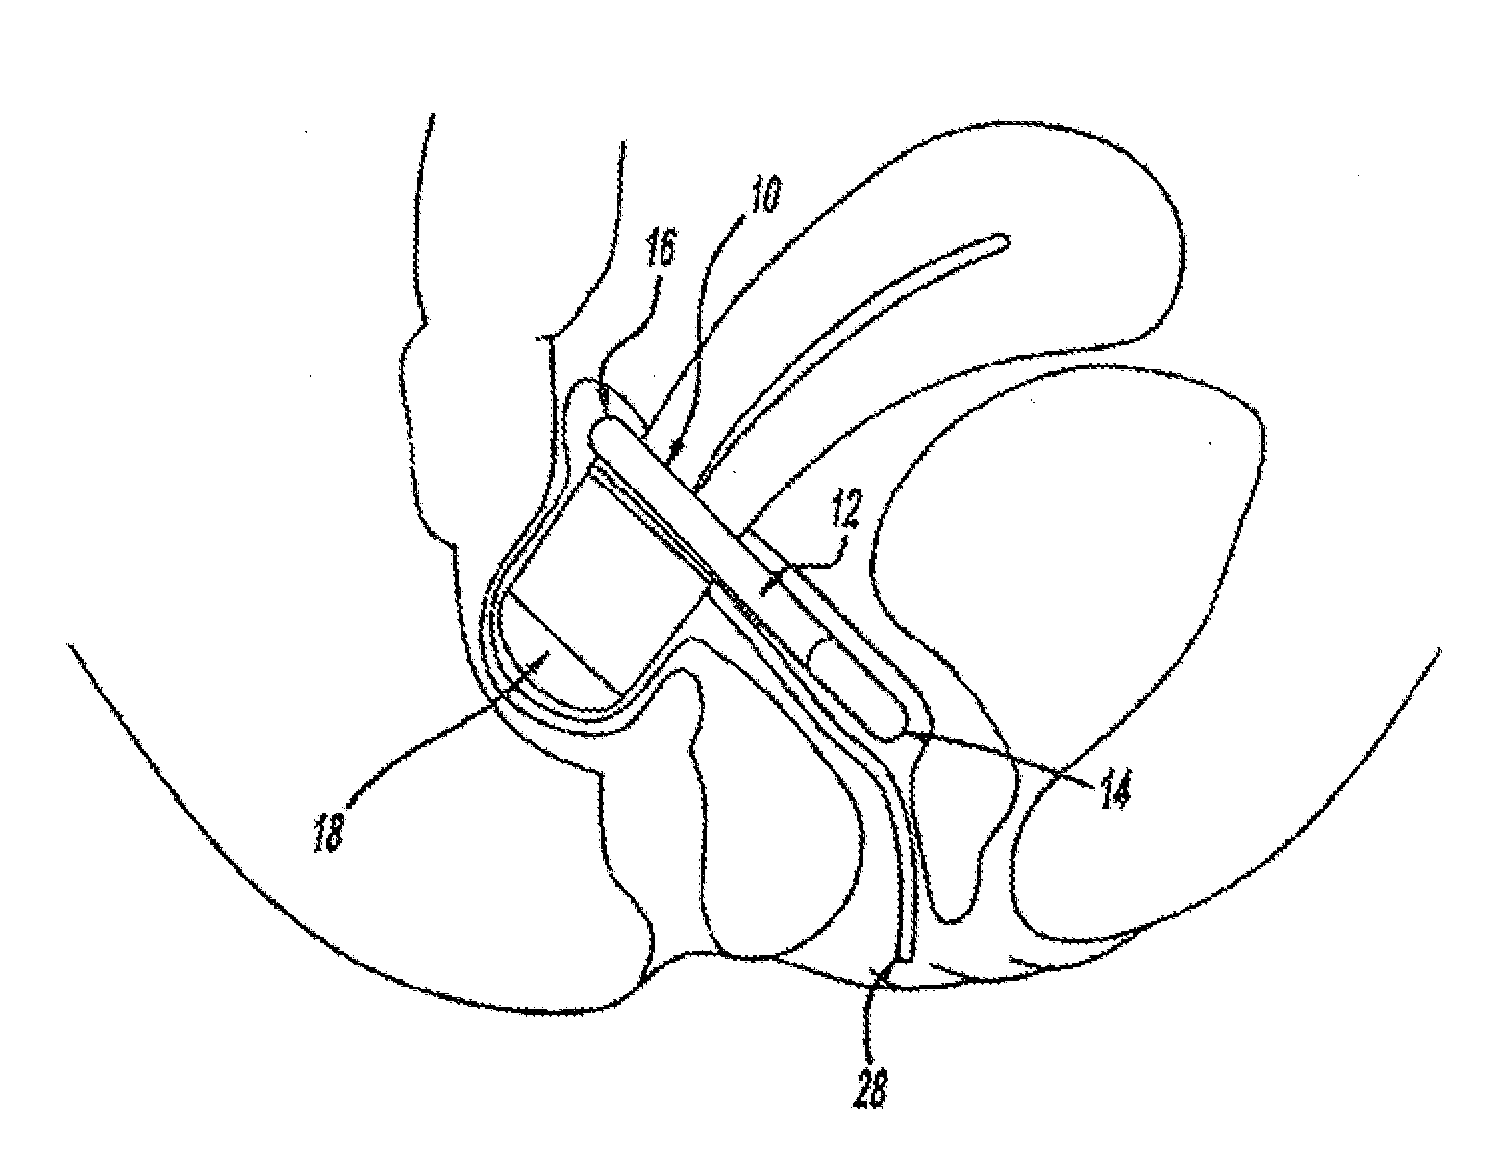 Intra-vaginal devices and methods for treating fecal incontinence